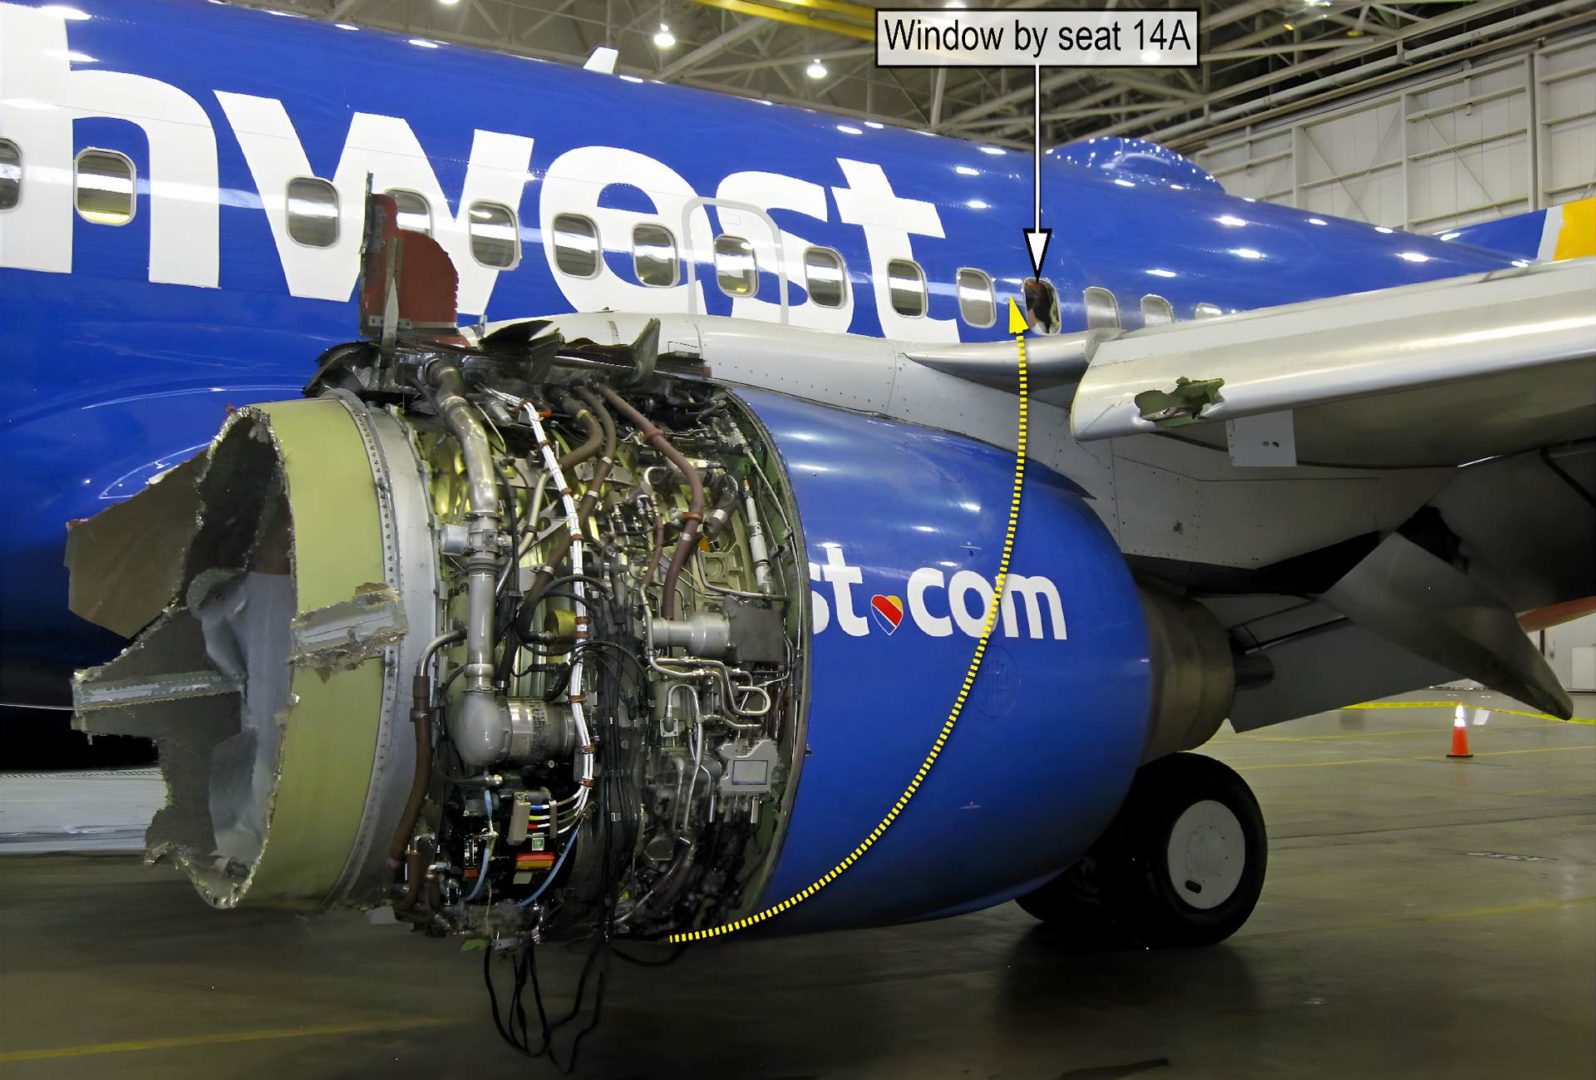 Southwest 1380 Accident Prompts FAA Airworthiness Directives